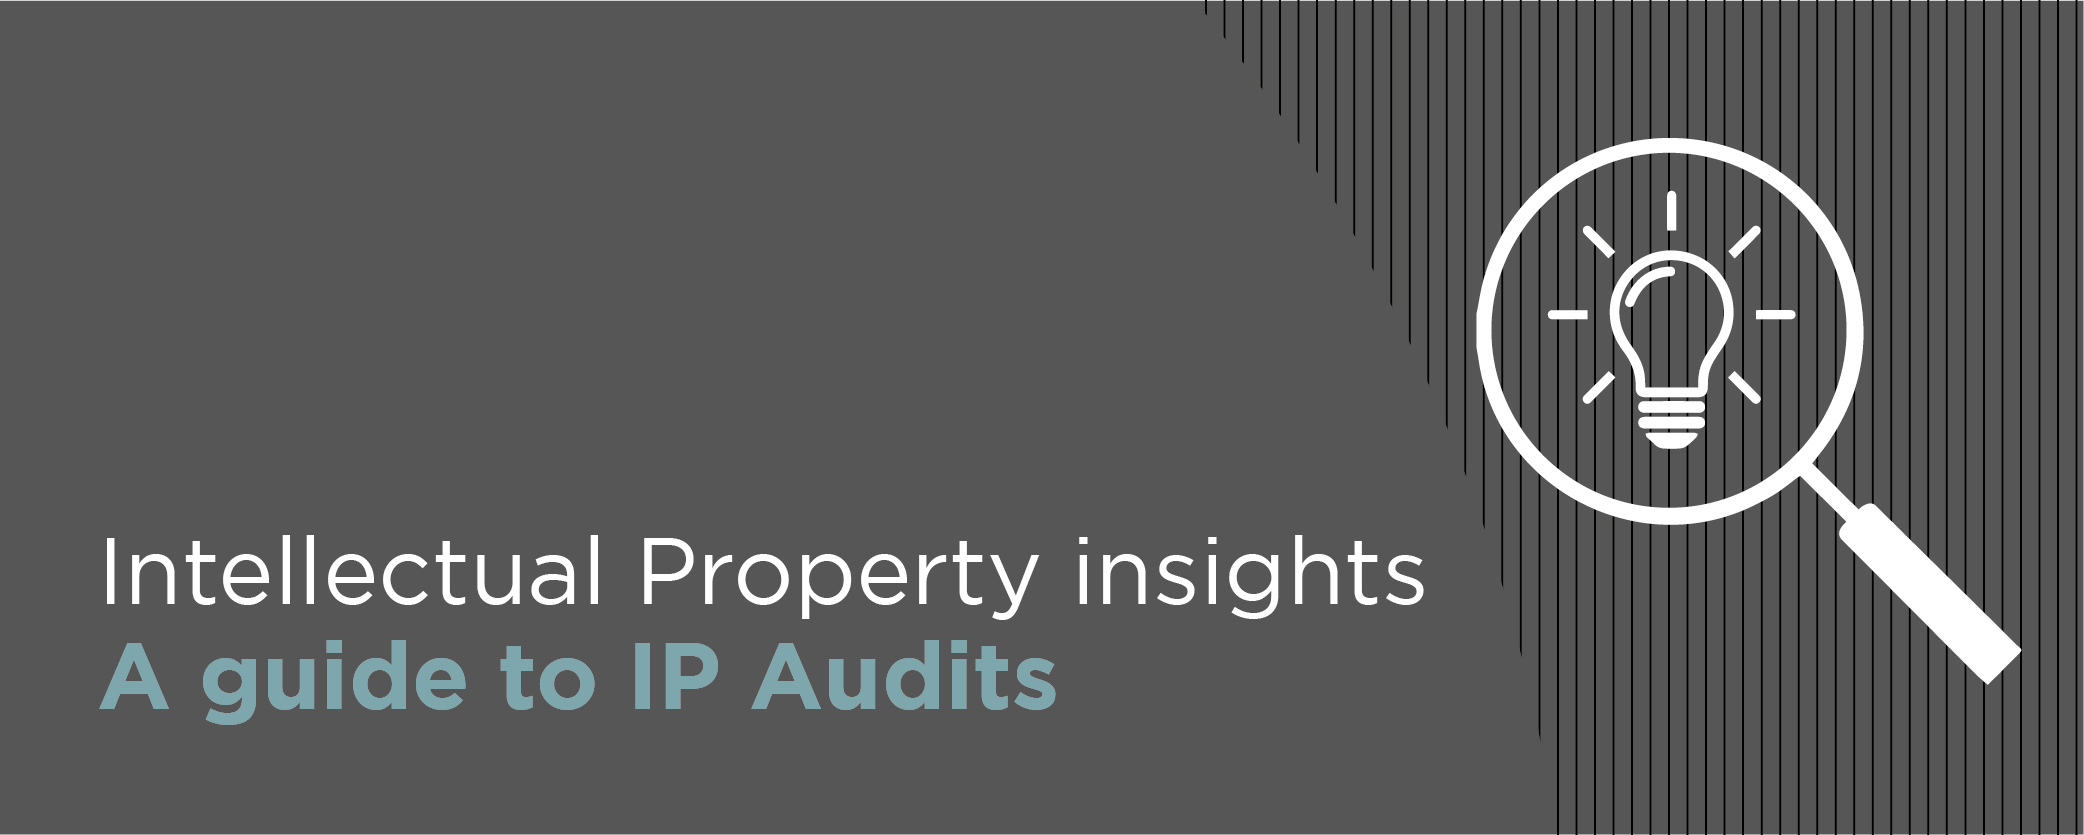 Intellectual Property insights: A guide to IP Audits